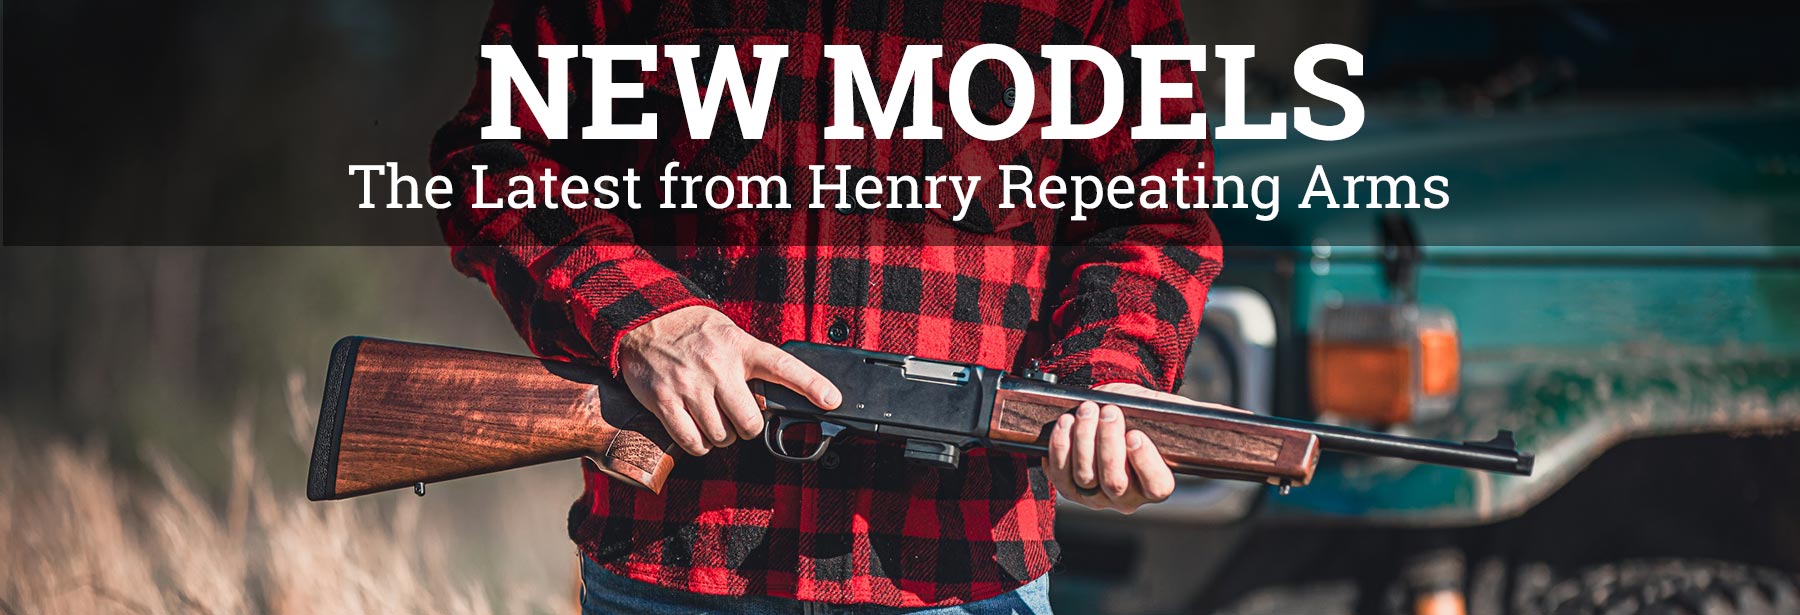 New Models from Henry Repeating Arms